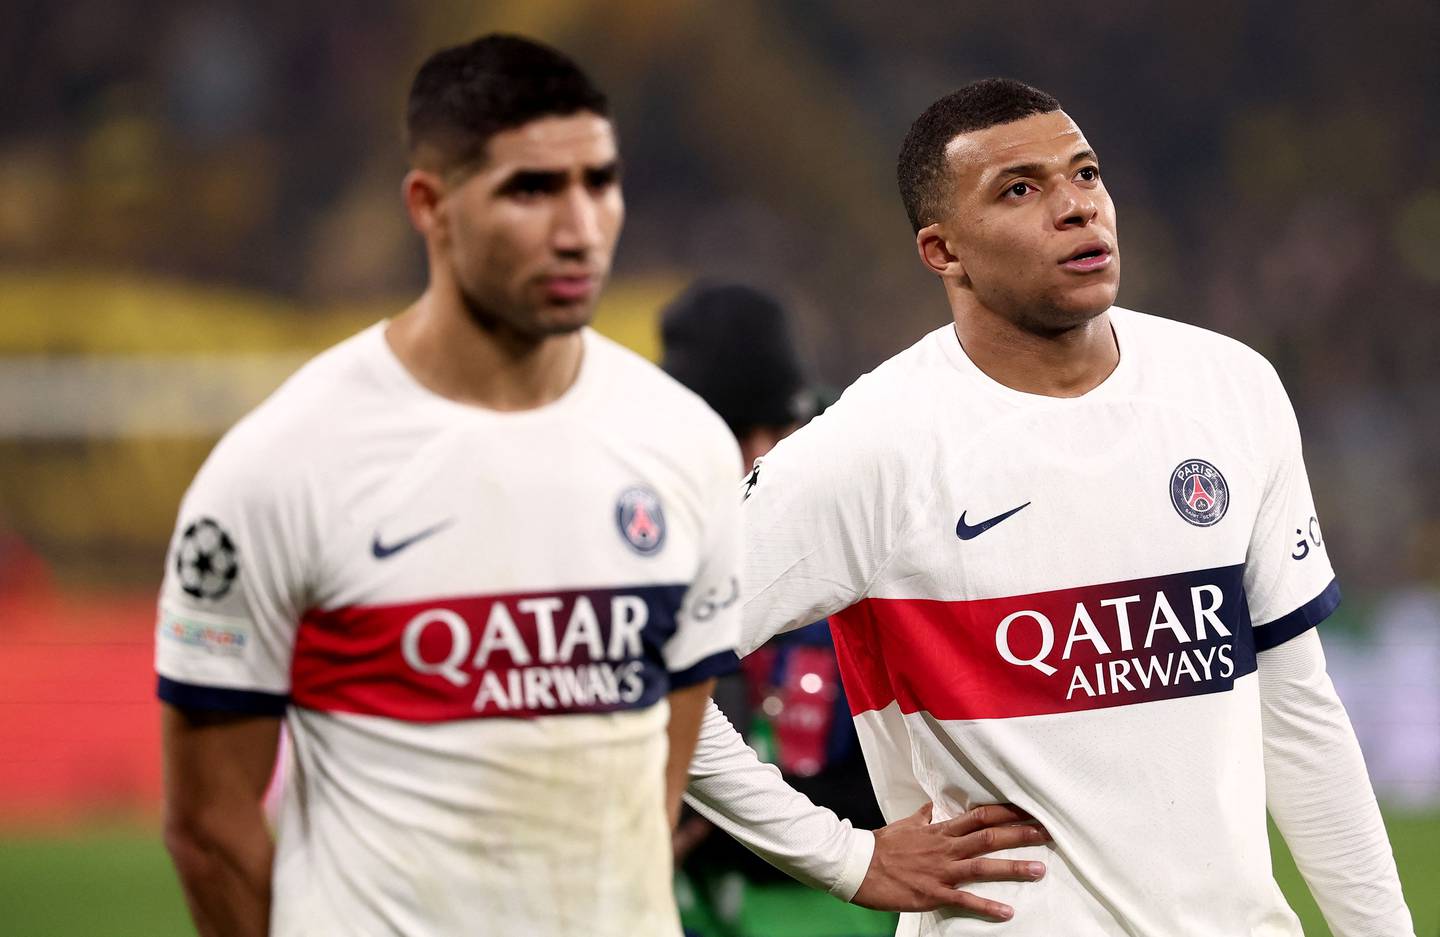 Paris Saint-Germain's French forward #07 Kylian Mbappe (R) and Paris Saint-Germain's Moroccan defender #02 Achraf Hakimi react after the UEFA Champions League group F football match between BVB Borussia Dortmund and Paris Saint-Germain in Dortmund, western Germany, on December 13, 2023. (Photo by FRANCK FIFE / AFP)